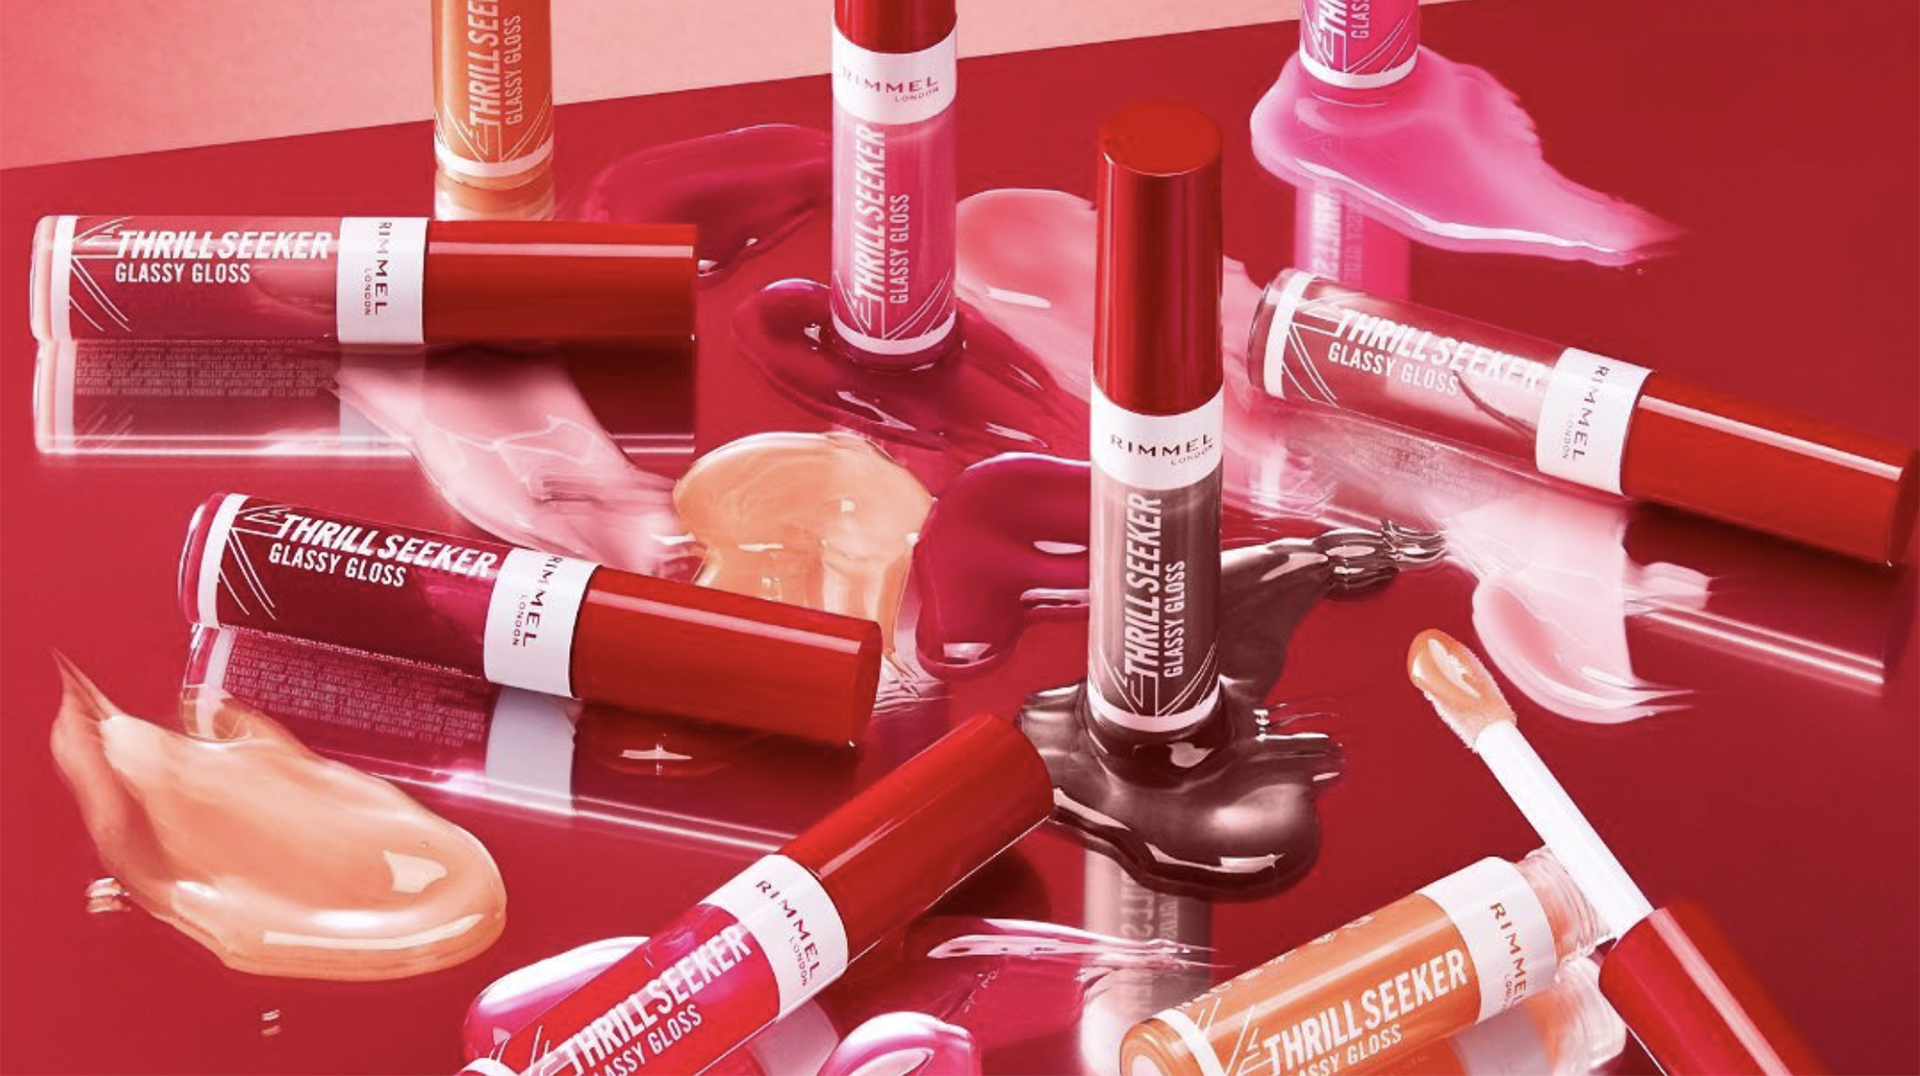 Rimmel London ad banned for implying girls need make-up at school to succeed - TheIndustry.beauty